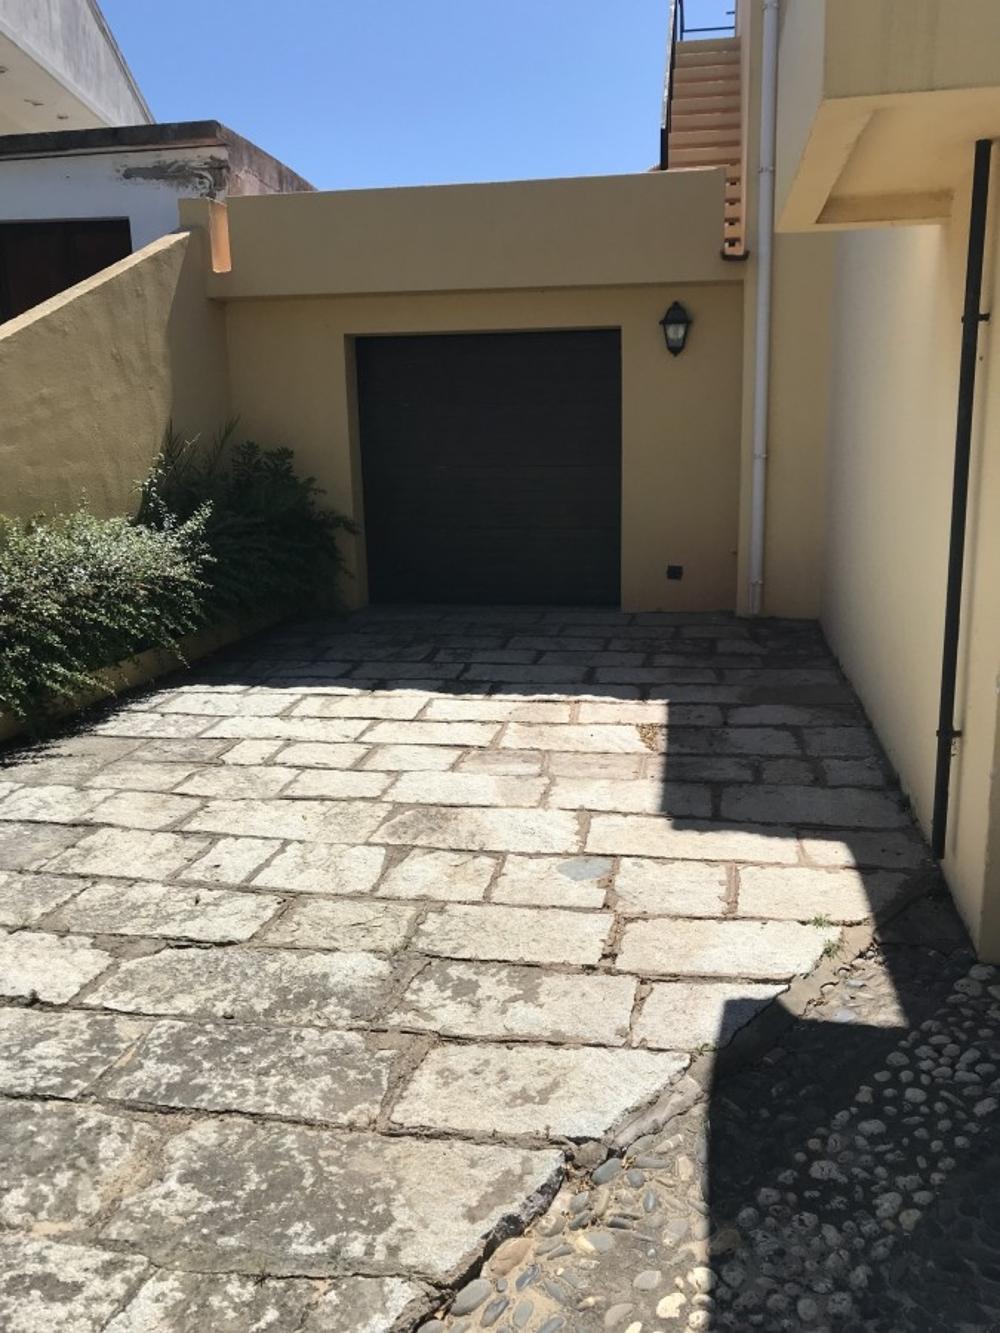  for sale house  Sines  Sines 3